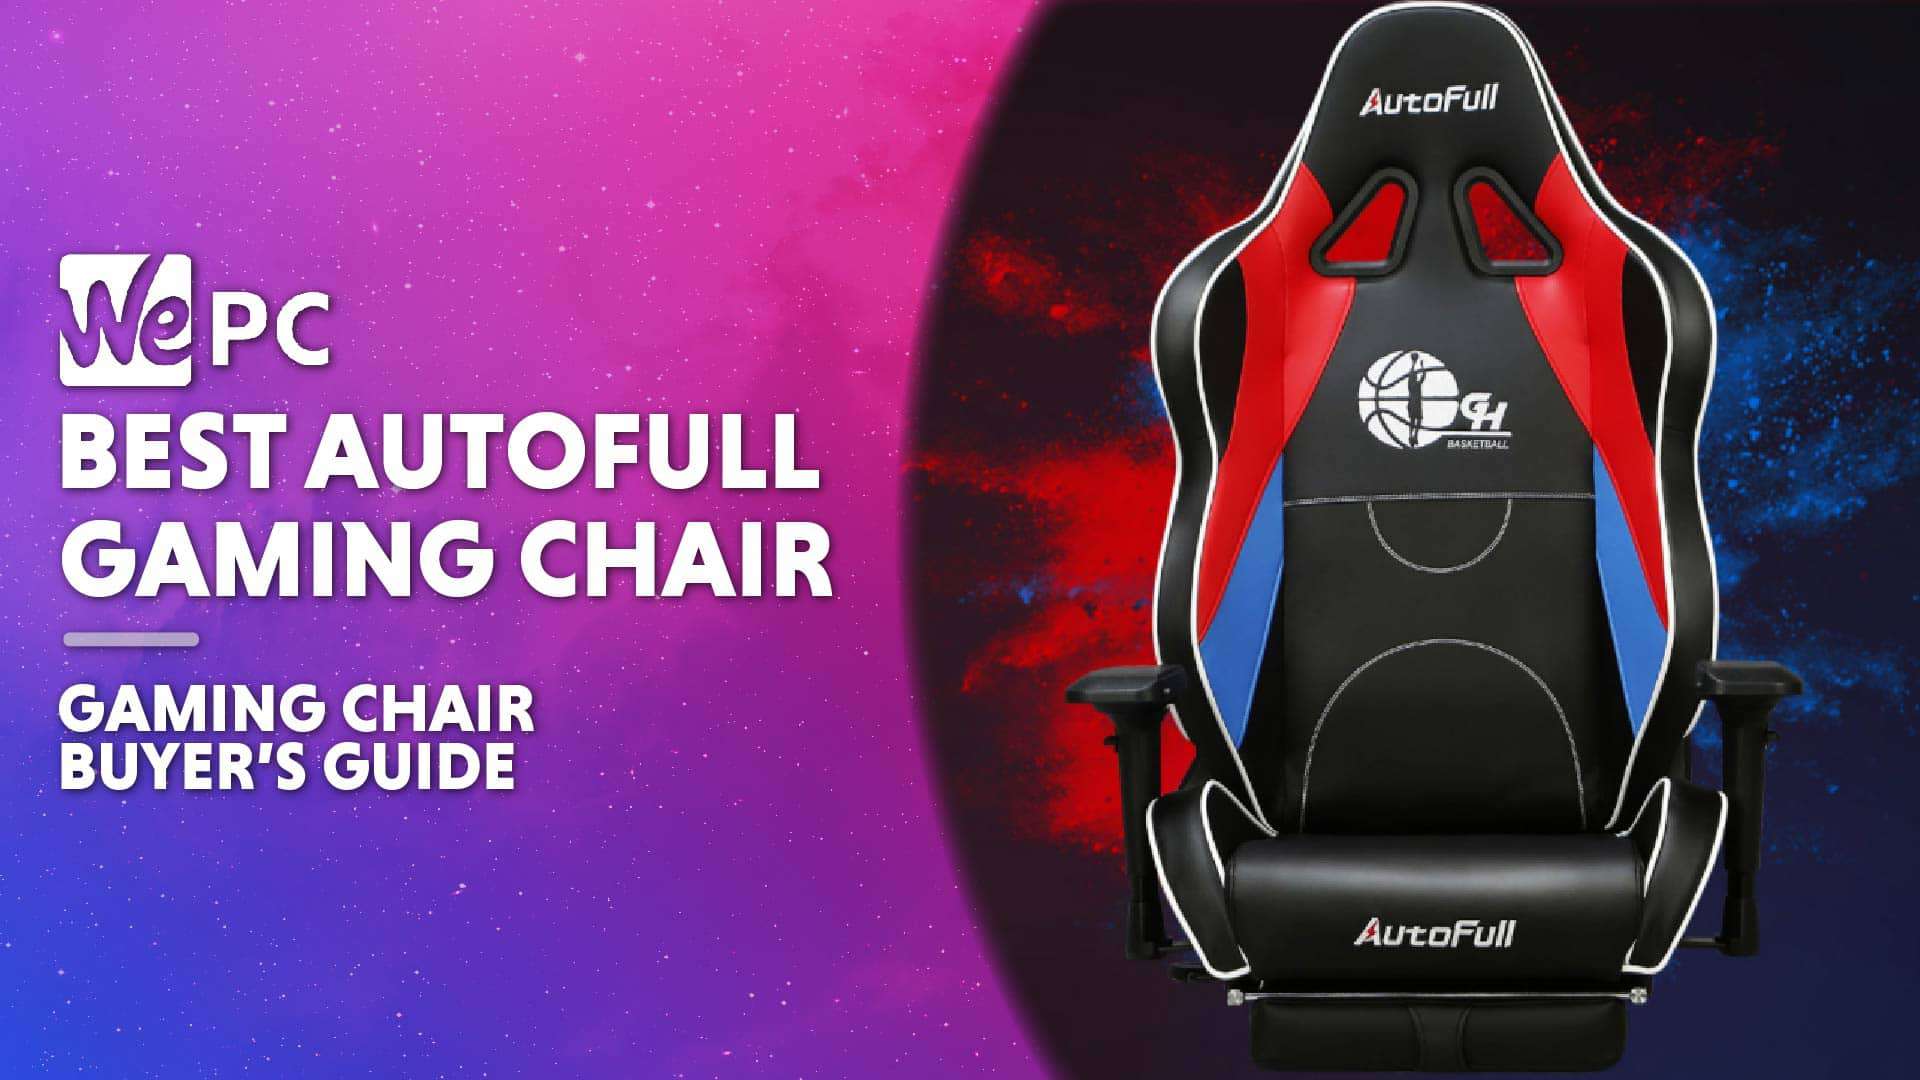 WEPC best autofull chair Featured image 01